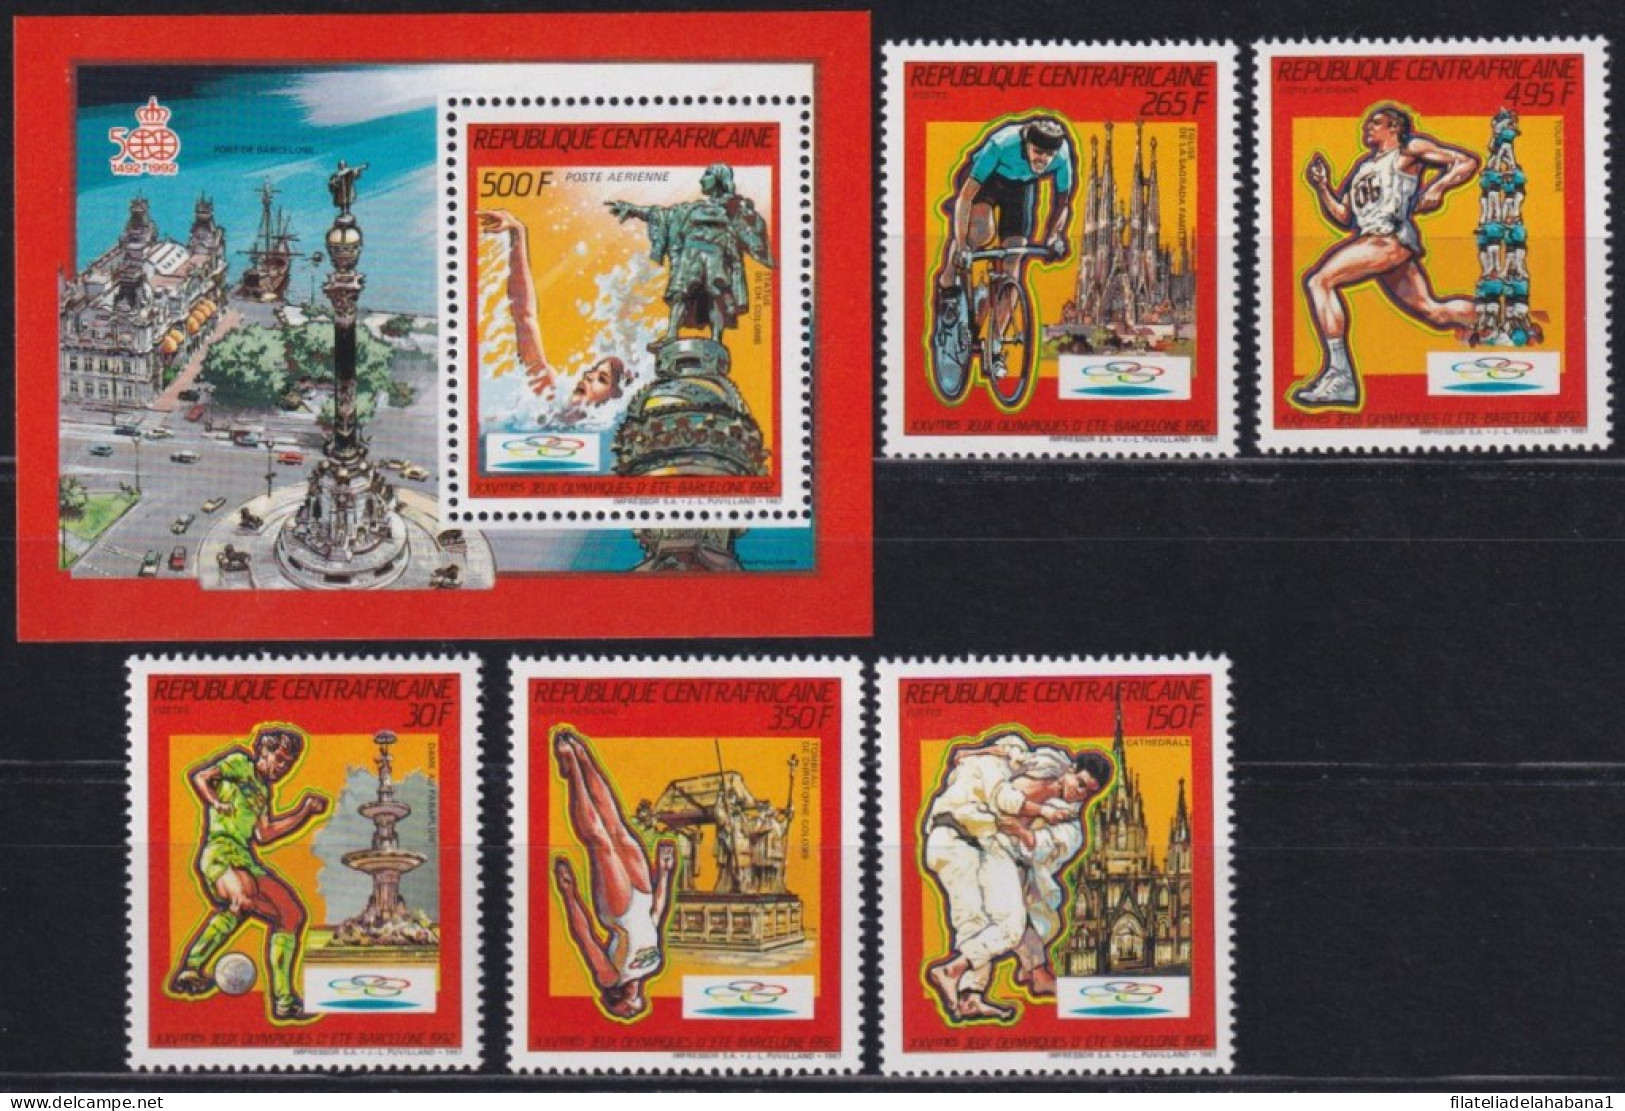 F-EX48798 CENTRAL AFRICA MNH 1987 OLYMPIC GAMES BARCELONA SOCCER CYCLING JUDO.  - Zomer 1992: Barcelona